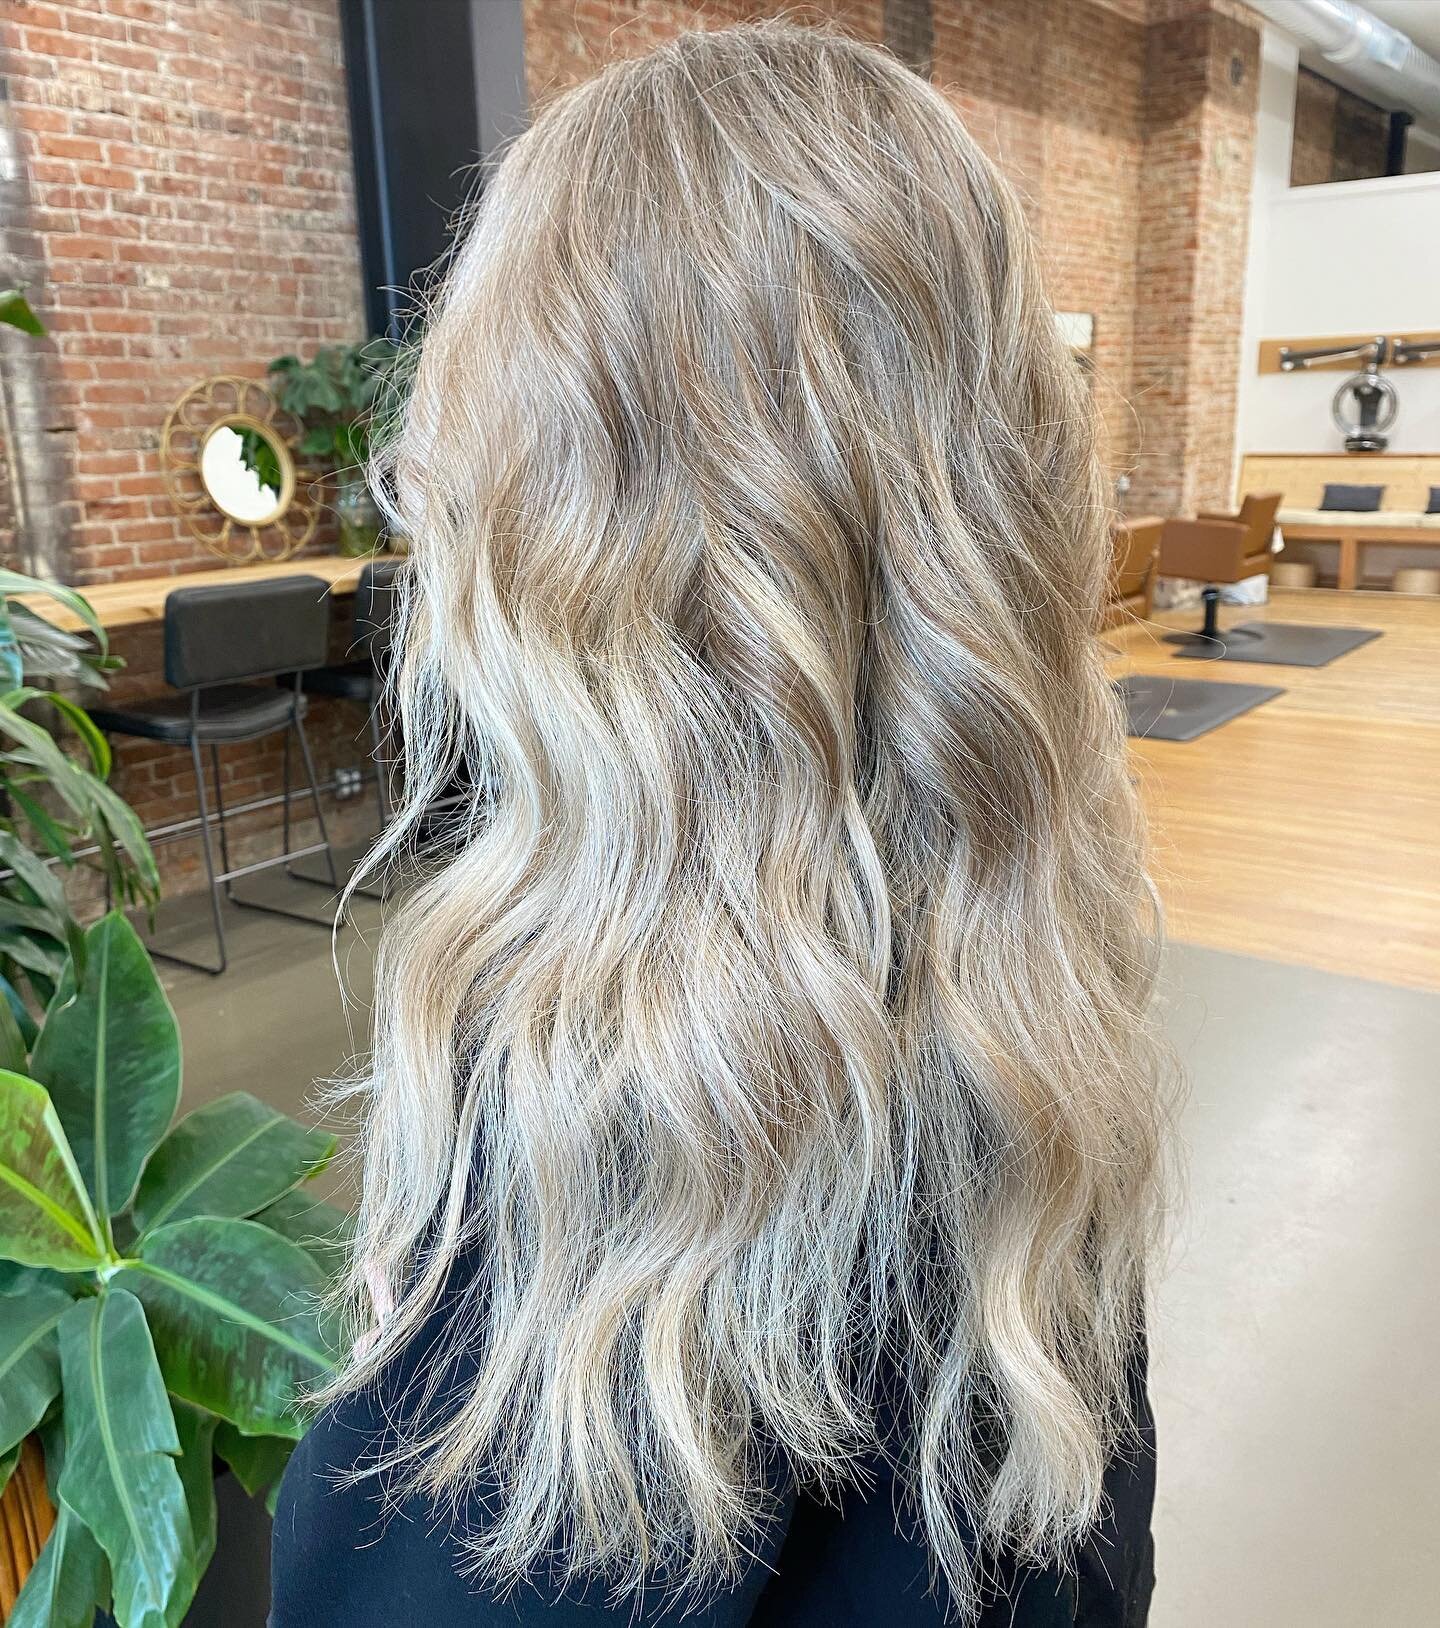 From months of grow out to a beautifully blended blonde 🤍

#pnwhair #pnwhairstylist #pnwhairsalon #washingtonhairstylist #washingtonstatehairstylist #washingtonhairsalon #seattlehairstylist #bellevuehairstylist #skagitcountyhairstylist #whatcomcount